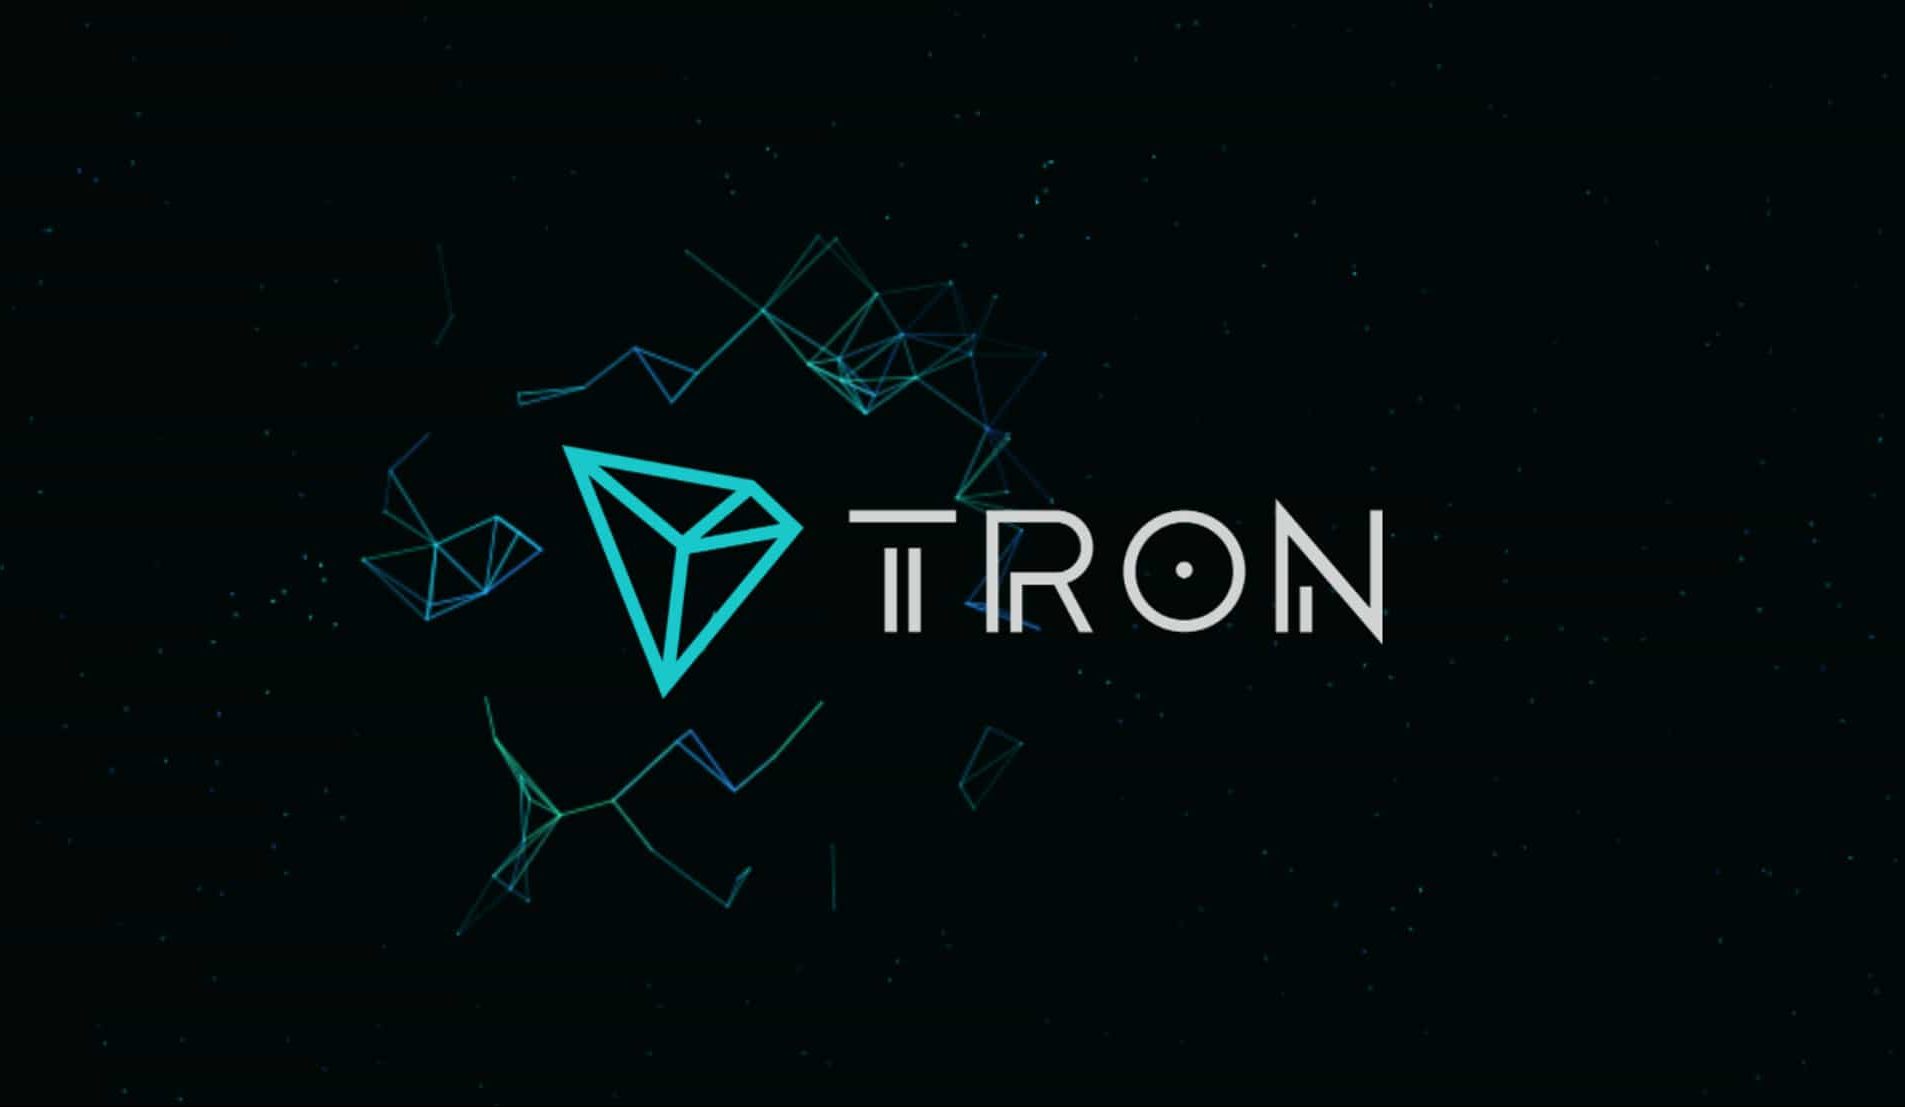 Tron (TRX) Price Prediction and Analysis in December 2020 - Crypto 24 / 7 News